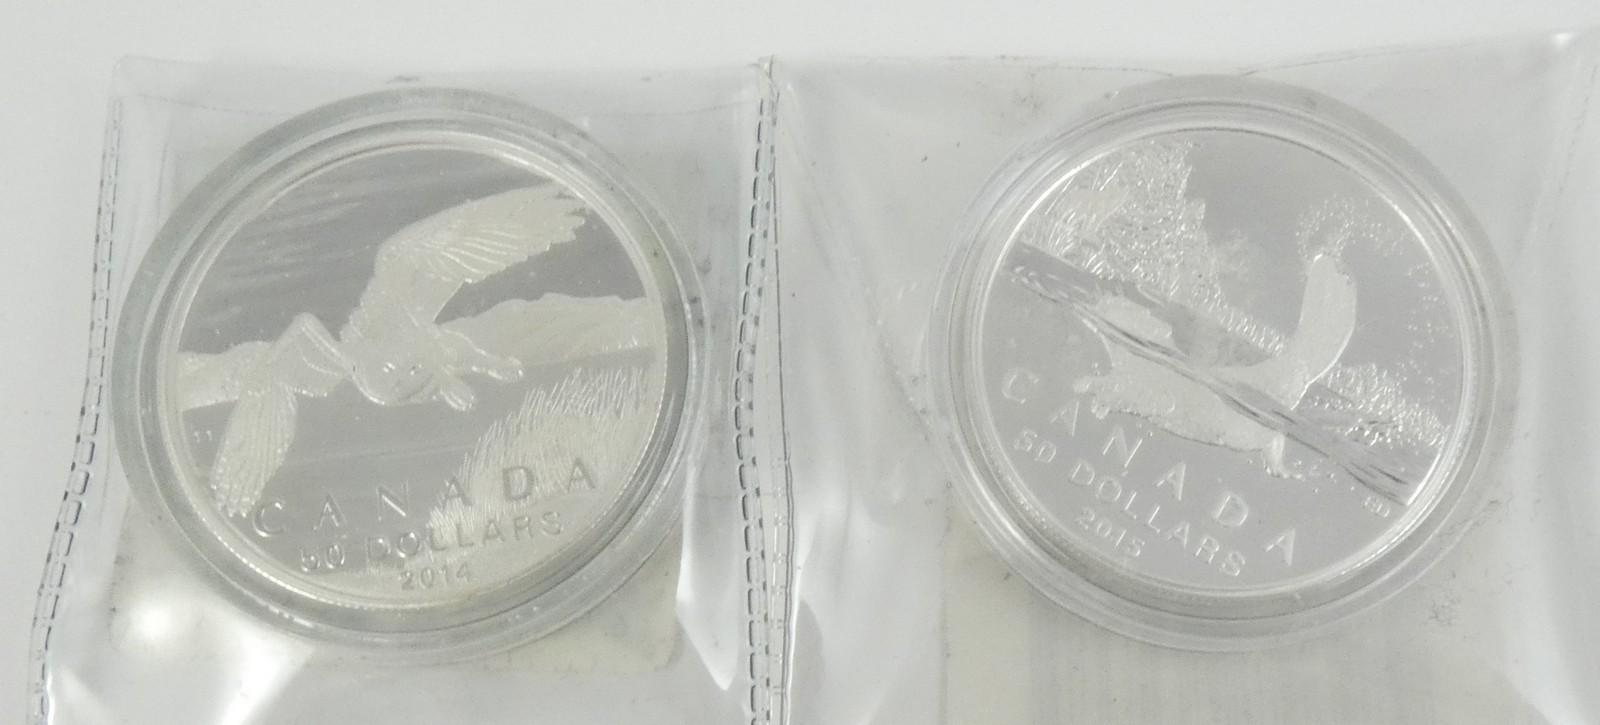 2 CANADIAN $50 COINS